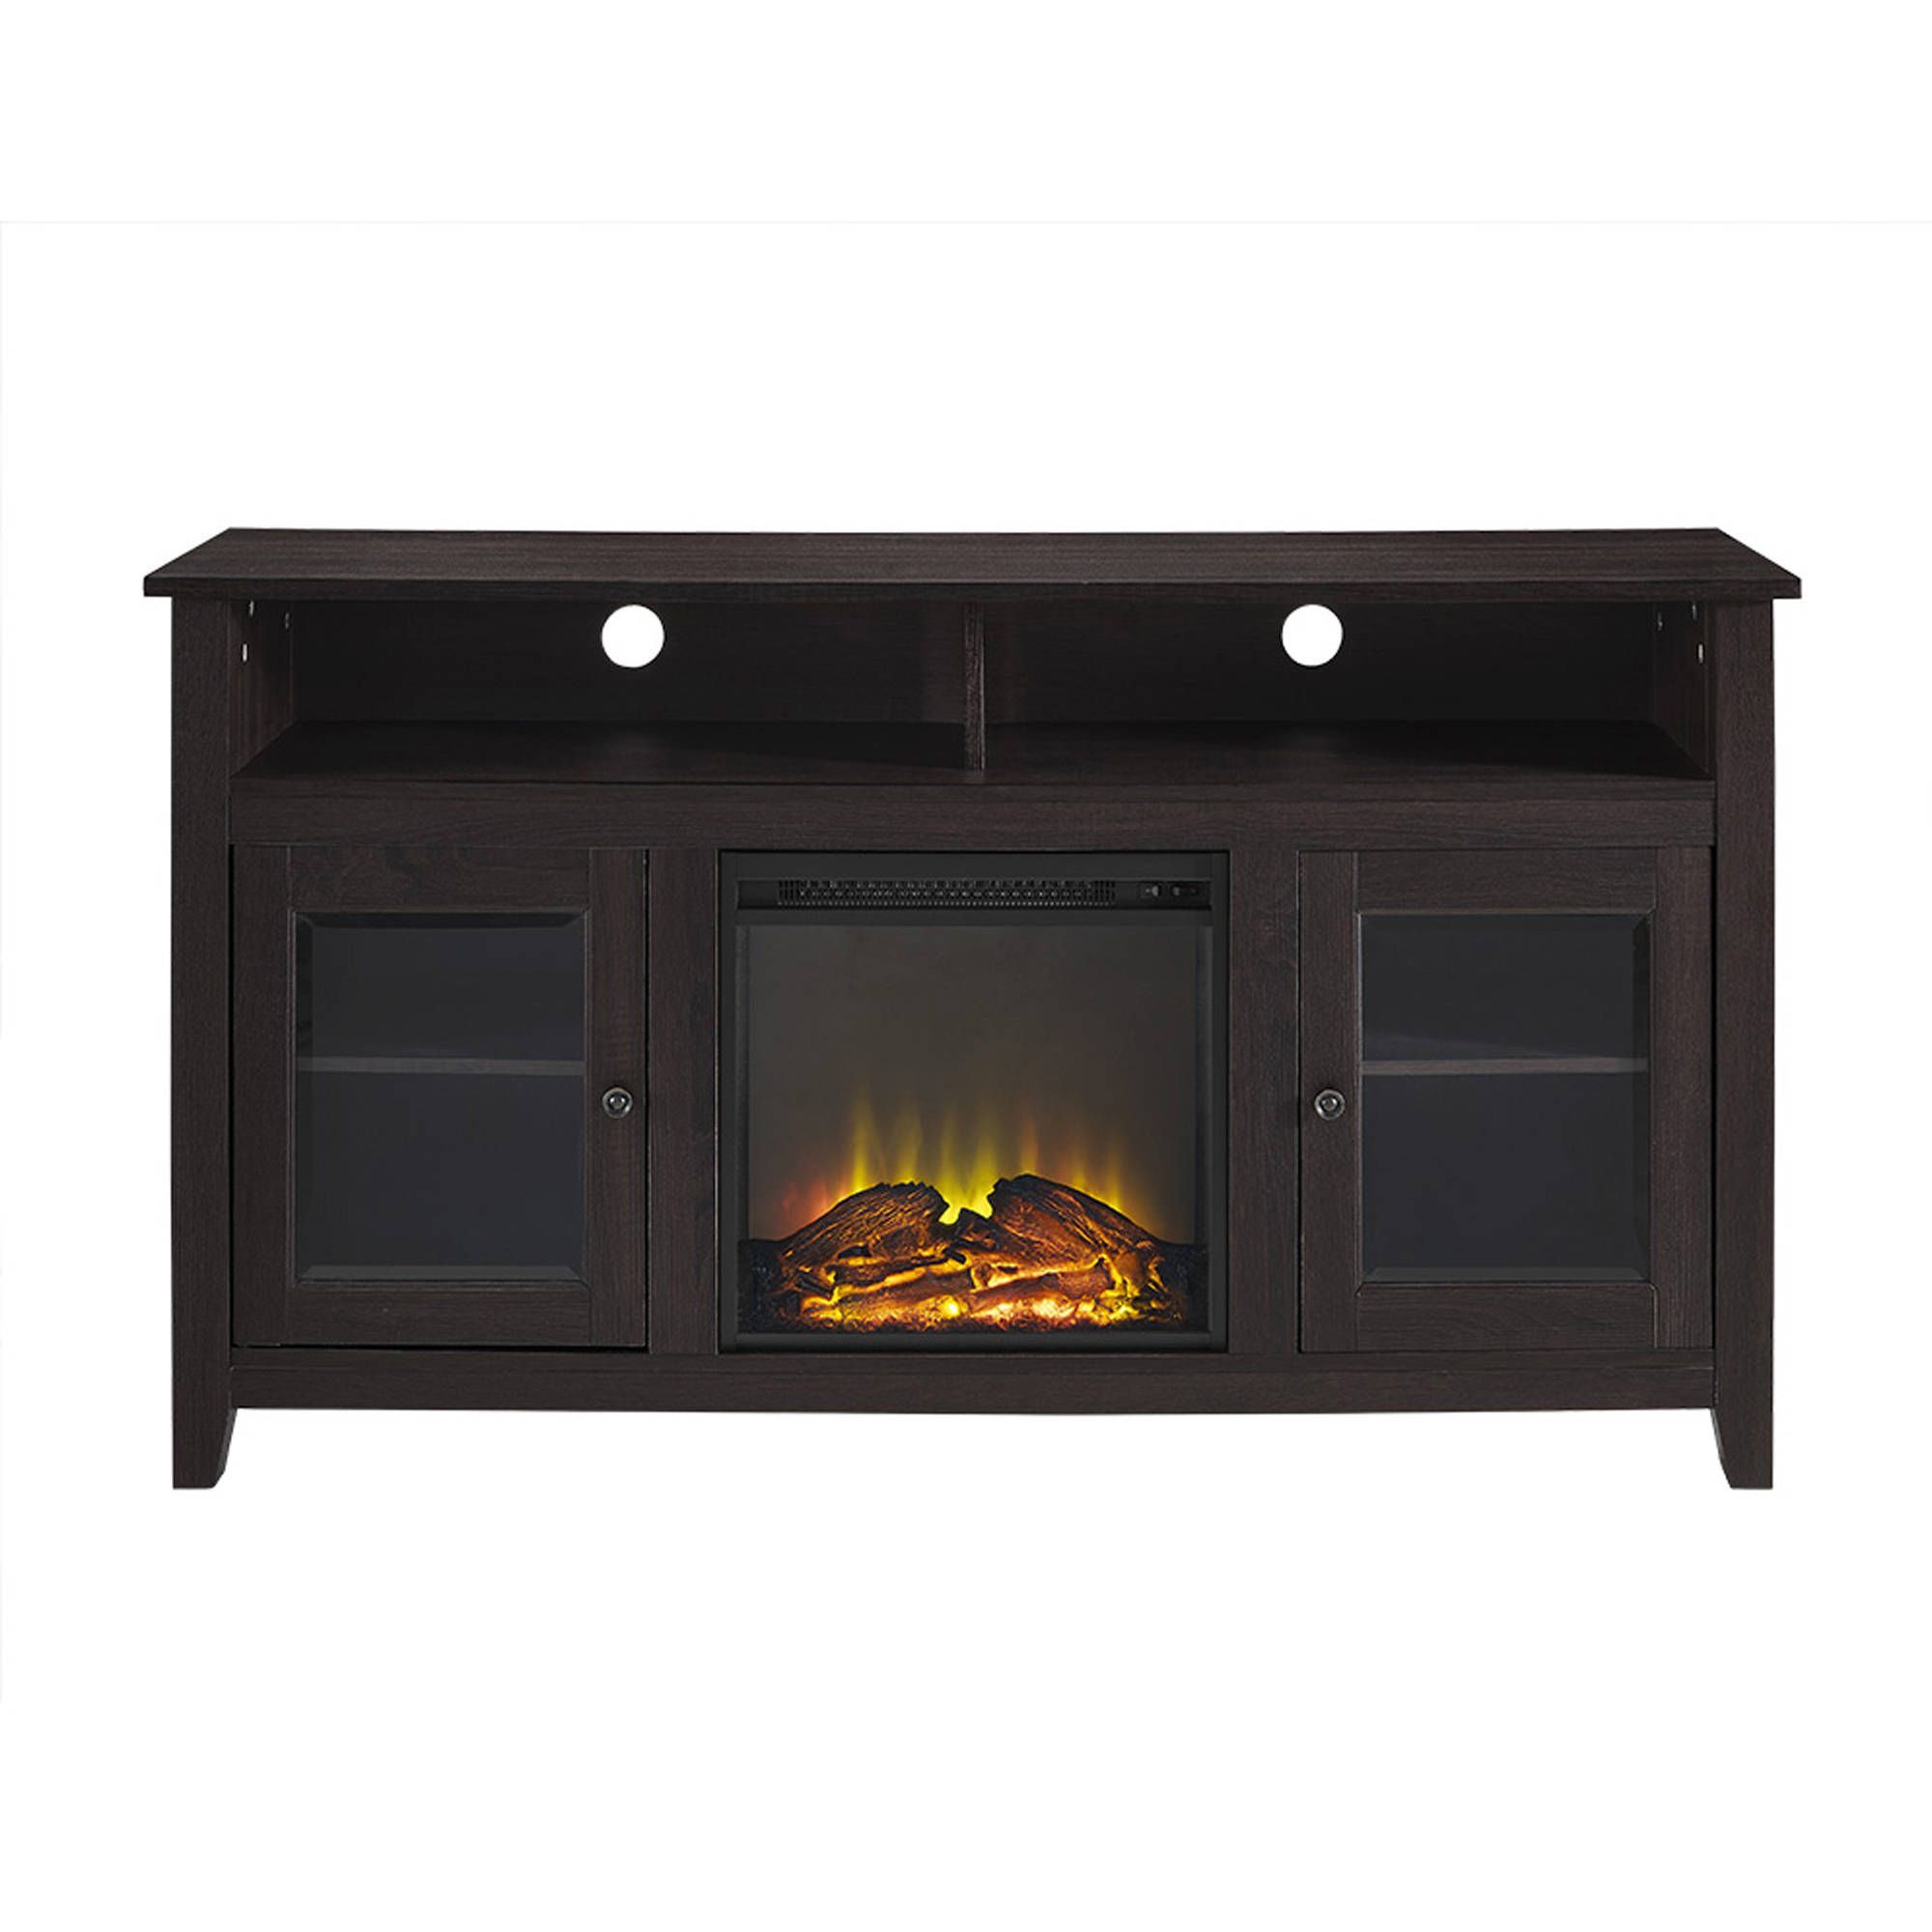 58" Wood Highboy Fireplace Tv Stand For Tvs Up To 60 Intended For Evanston Tv Stands For Tvs Up To 60" (View 11 of 15)